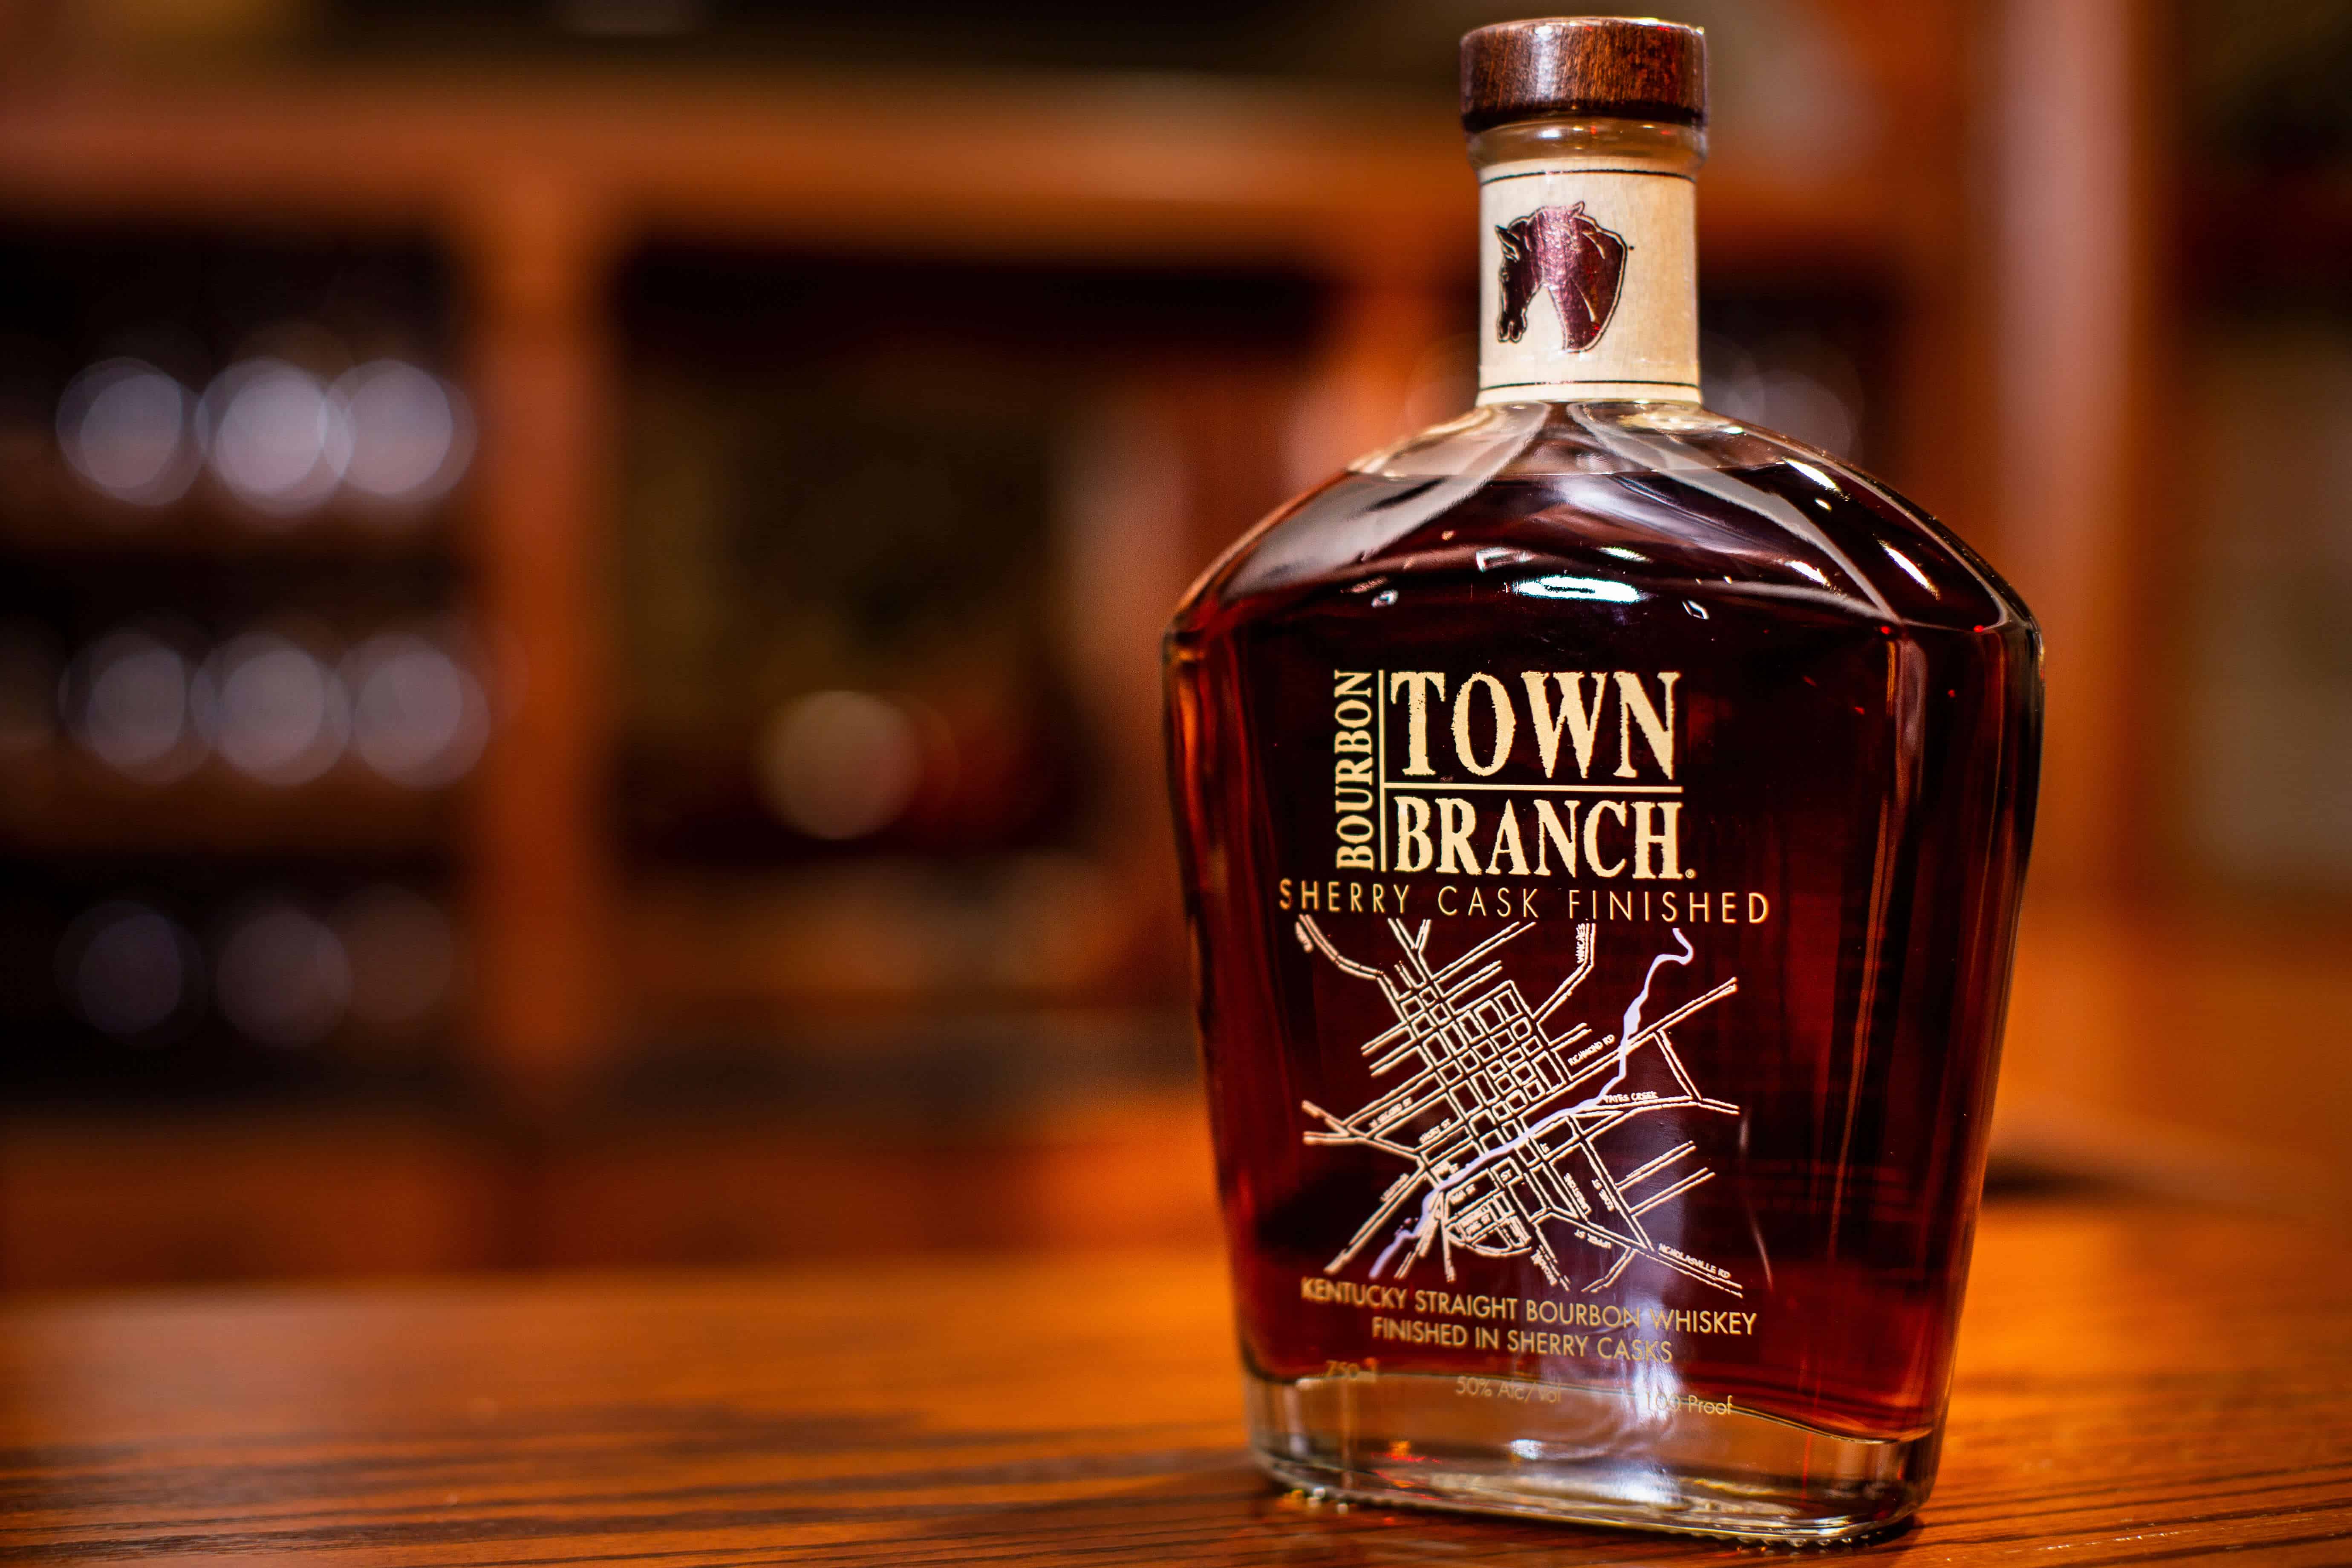 Town Branch Sherry Cask Bottle 003 - Town Branch Distillery launches first barrel-finished expression, Town Branch® Bourbon: Sherry Cask Finished